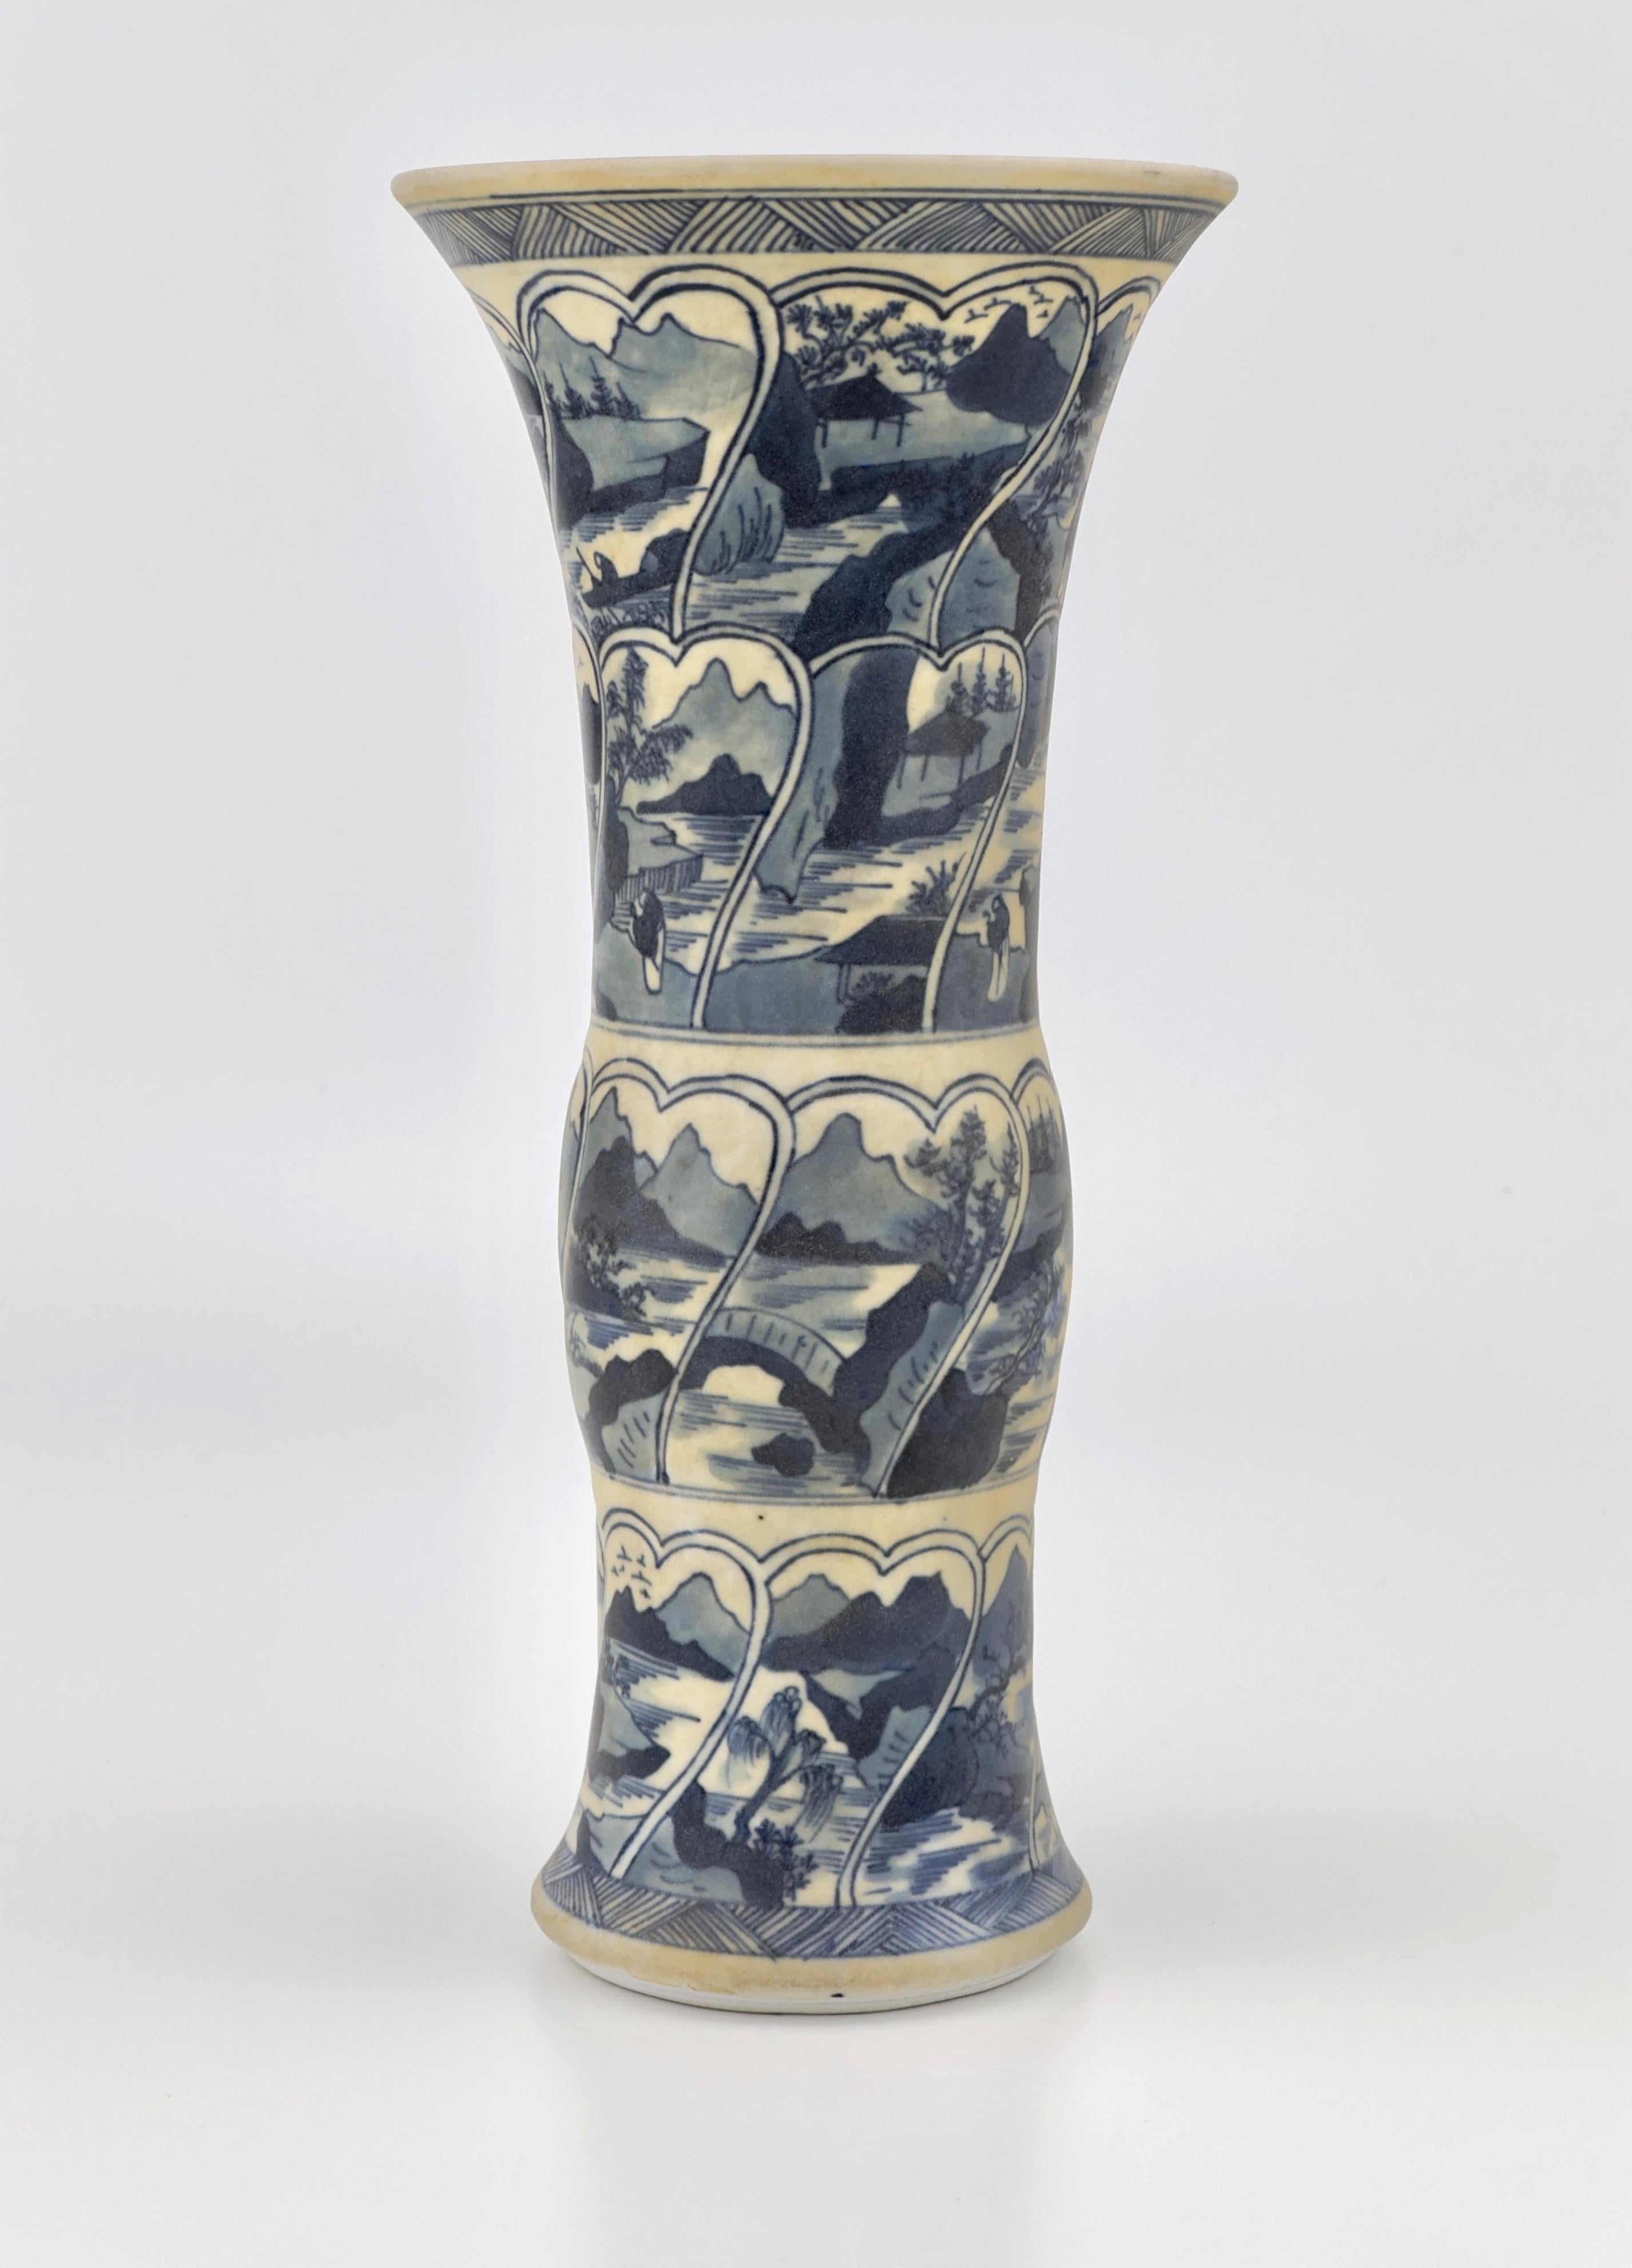 An attractive GU vase hand painted in cobalt blue with typical kangxi riverscape panels painting separated by lined borders. It is presumed that the surface turned yellow because it had been in the sea mud for a long time.

Period : Qing Dynasty,